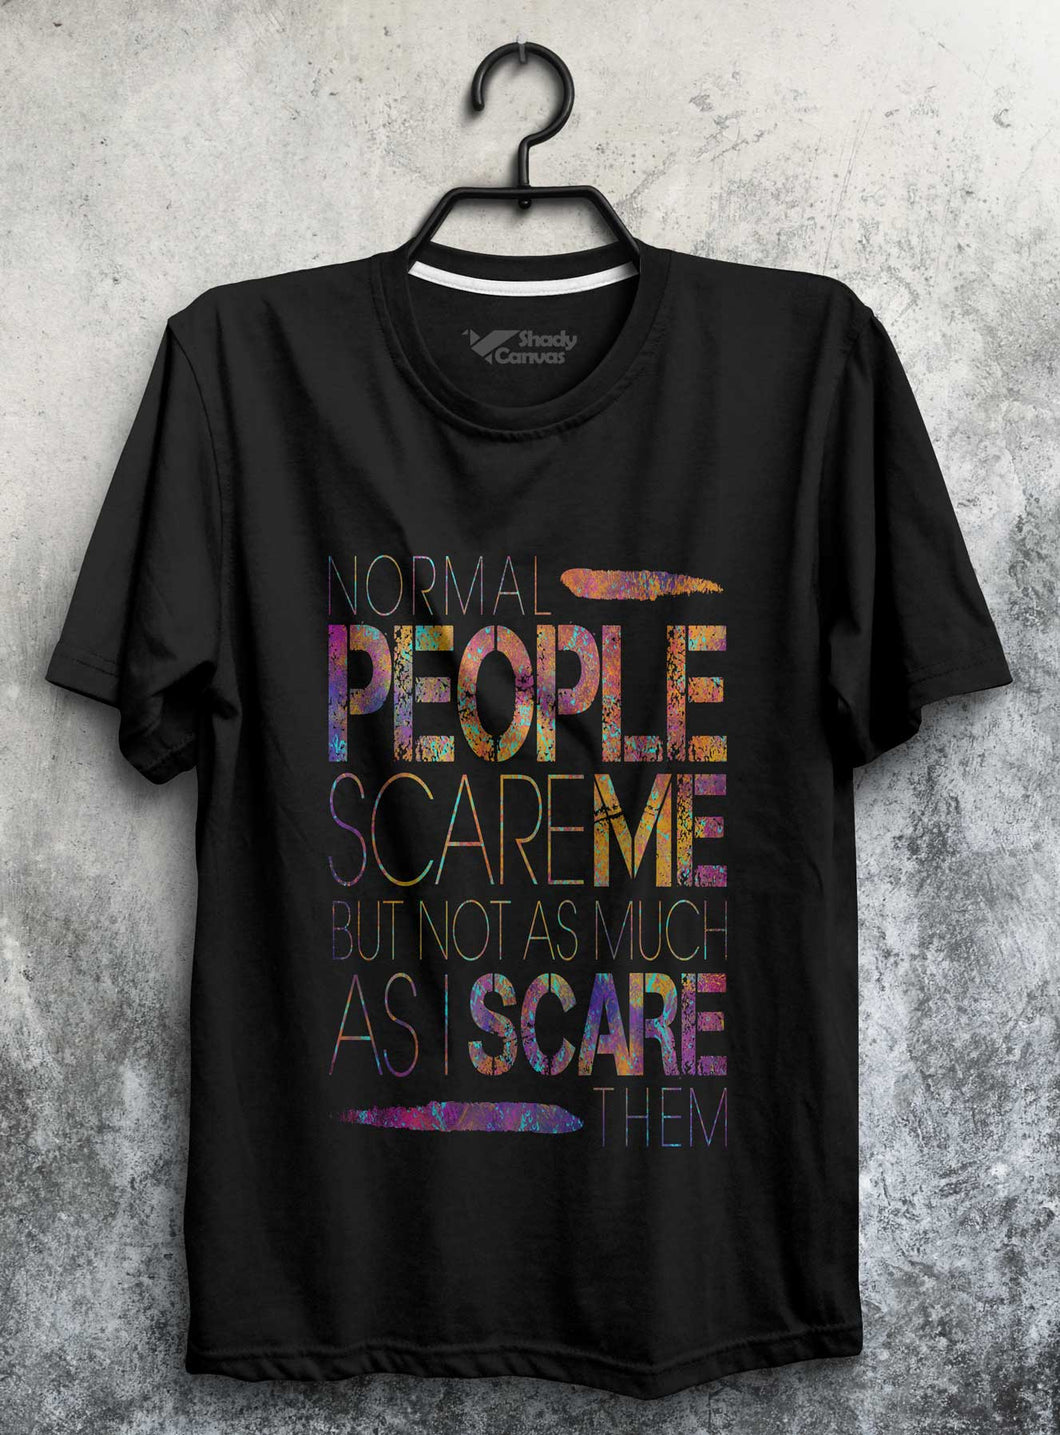 Normal People Don't Scare Me